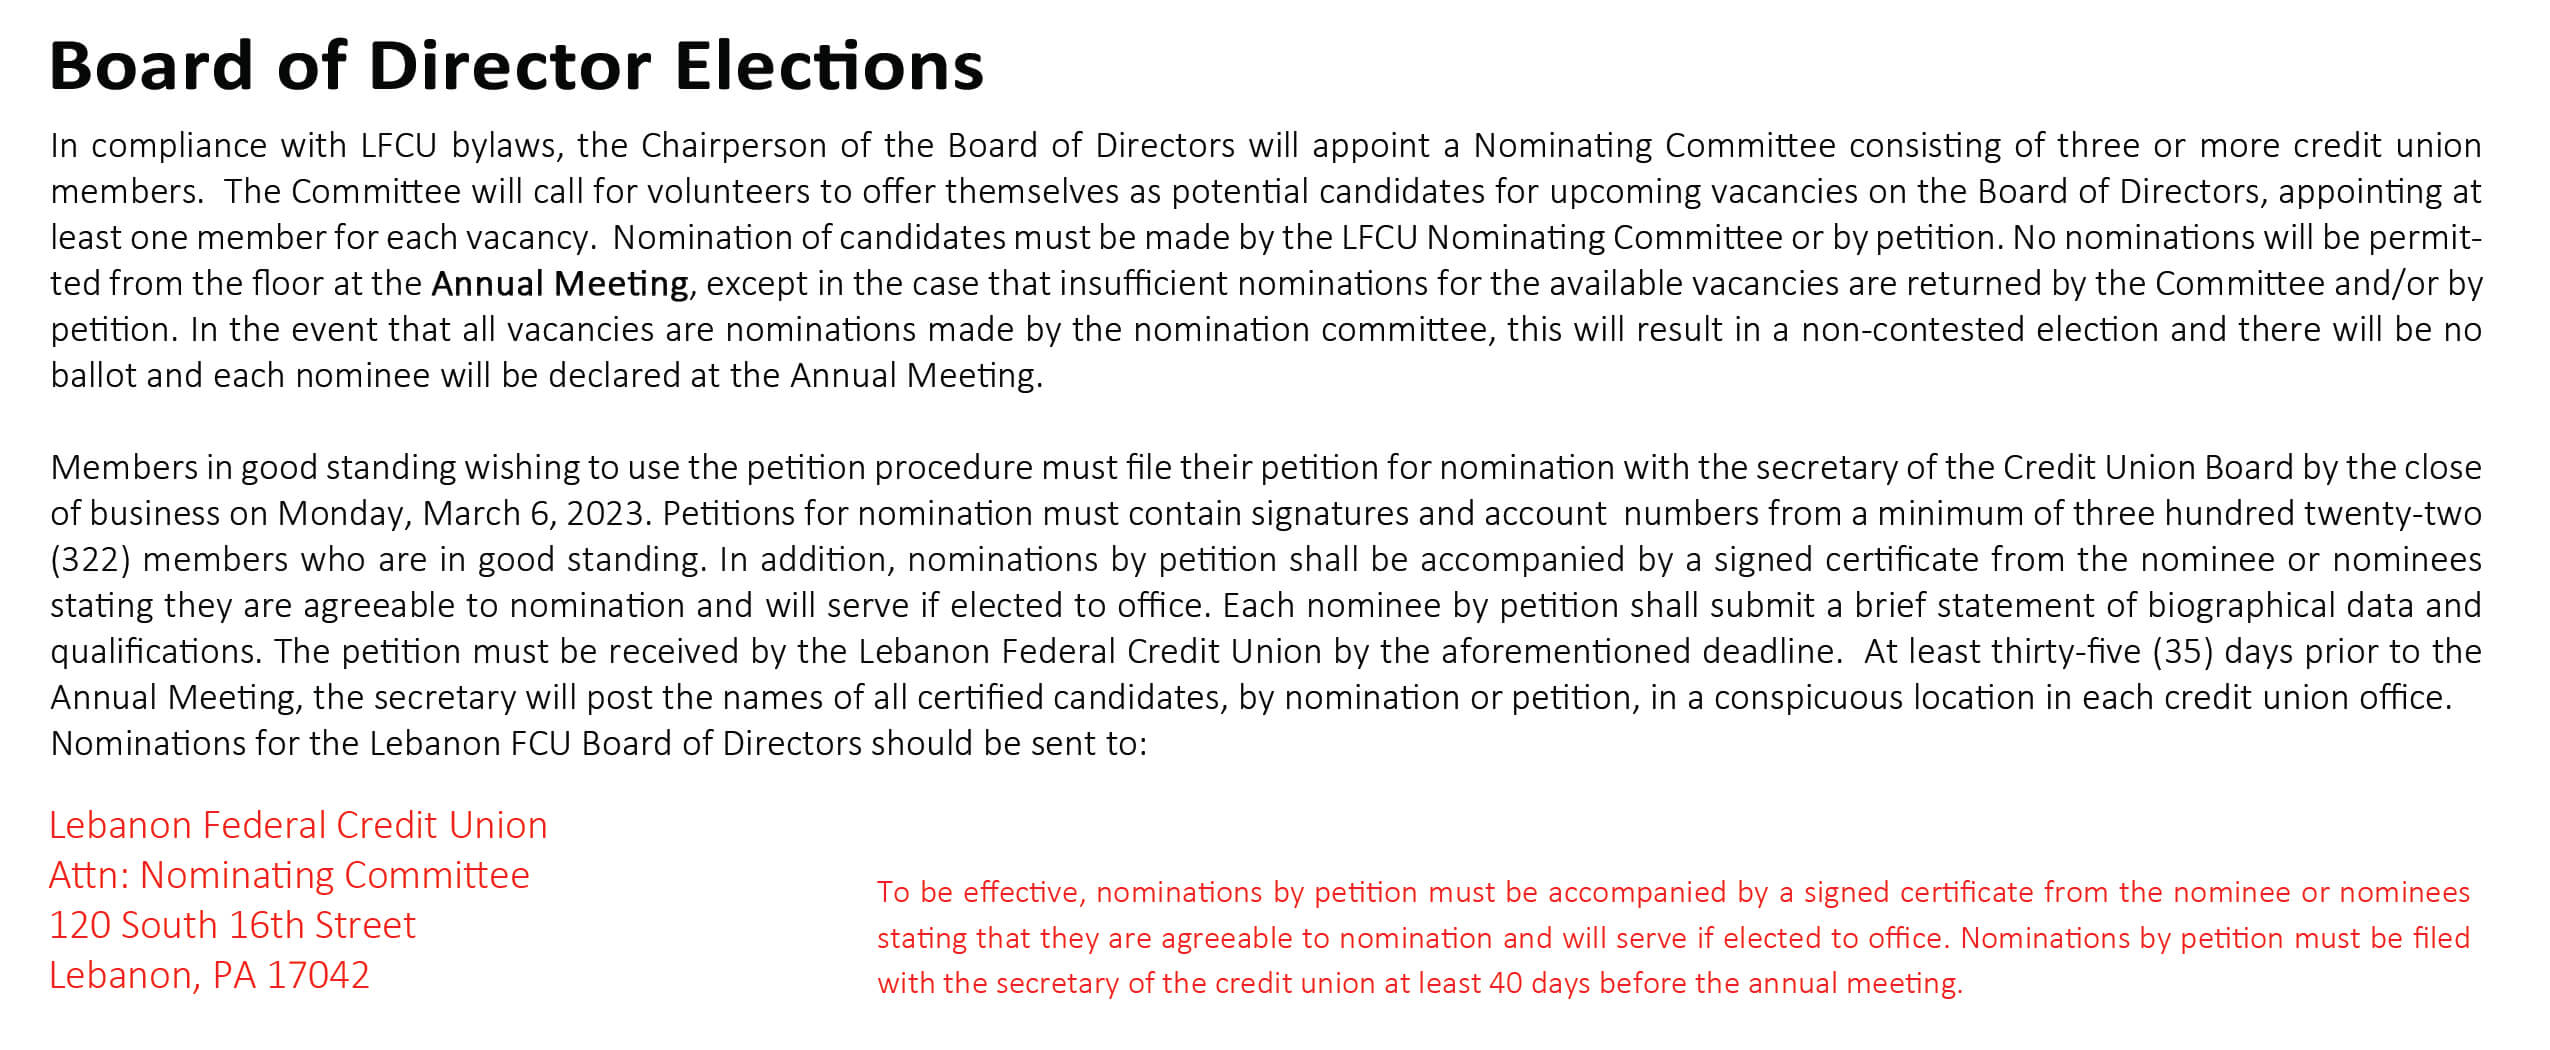 In compliance with LFCU bylaws, the Chairperson of the Board of Directors will appoint a Nominating Committee consisting of three or more credit union members. The Committee will call for volunteers to offer themselves as potential candidates for upcoming vacancies on the Board of Directors, appointing at least one member for each vacancy. Nomination of candidates must be made by the LFCU Nominating Committee or by petition. No nominations will be permitted from the floor at the Annual Meeting, except in the case that insufficient nominations for the available vacancies are returned by the Committee and/or by petition. In the event that all vacancies are nominations made by the nomination committee, this will result in a non-contested election and there will be no ballot and each nominee will be declared at the Annual Meeting. Members in good standing wishing to use the petition procedure must file their petition for nomination with the secretary of the Credit Union Board by the close of business on Monday, March 6, 2023. Petitions for nomination must contain signatures and account numbers from a minimum of three hundred twenty-two (322) members who are in good standing. In addition, nominations by petition shall be accompanied by a signed certificate from the nominee or nominees stating they are agreeable to nomination and will serve if elected to office. Each nominee by petition shall submit a brief statement of biographical data and qualifications. The petition must be received by the Lebanon Federal Credit Union by the aforementioned deadline. At least thirty-five (35) days prior to the Annual Meeting, the secretary will post the names of all certified candidates, by nomination or petition, in a conspicuous location in each credit union office. Nominations for the Lebanon FCU Board of Directors should be sent to: